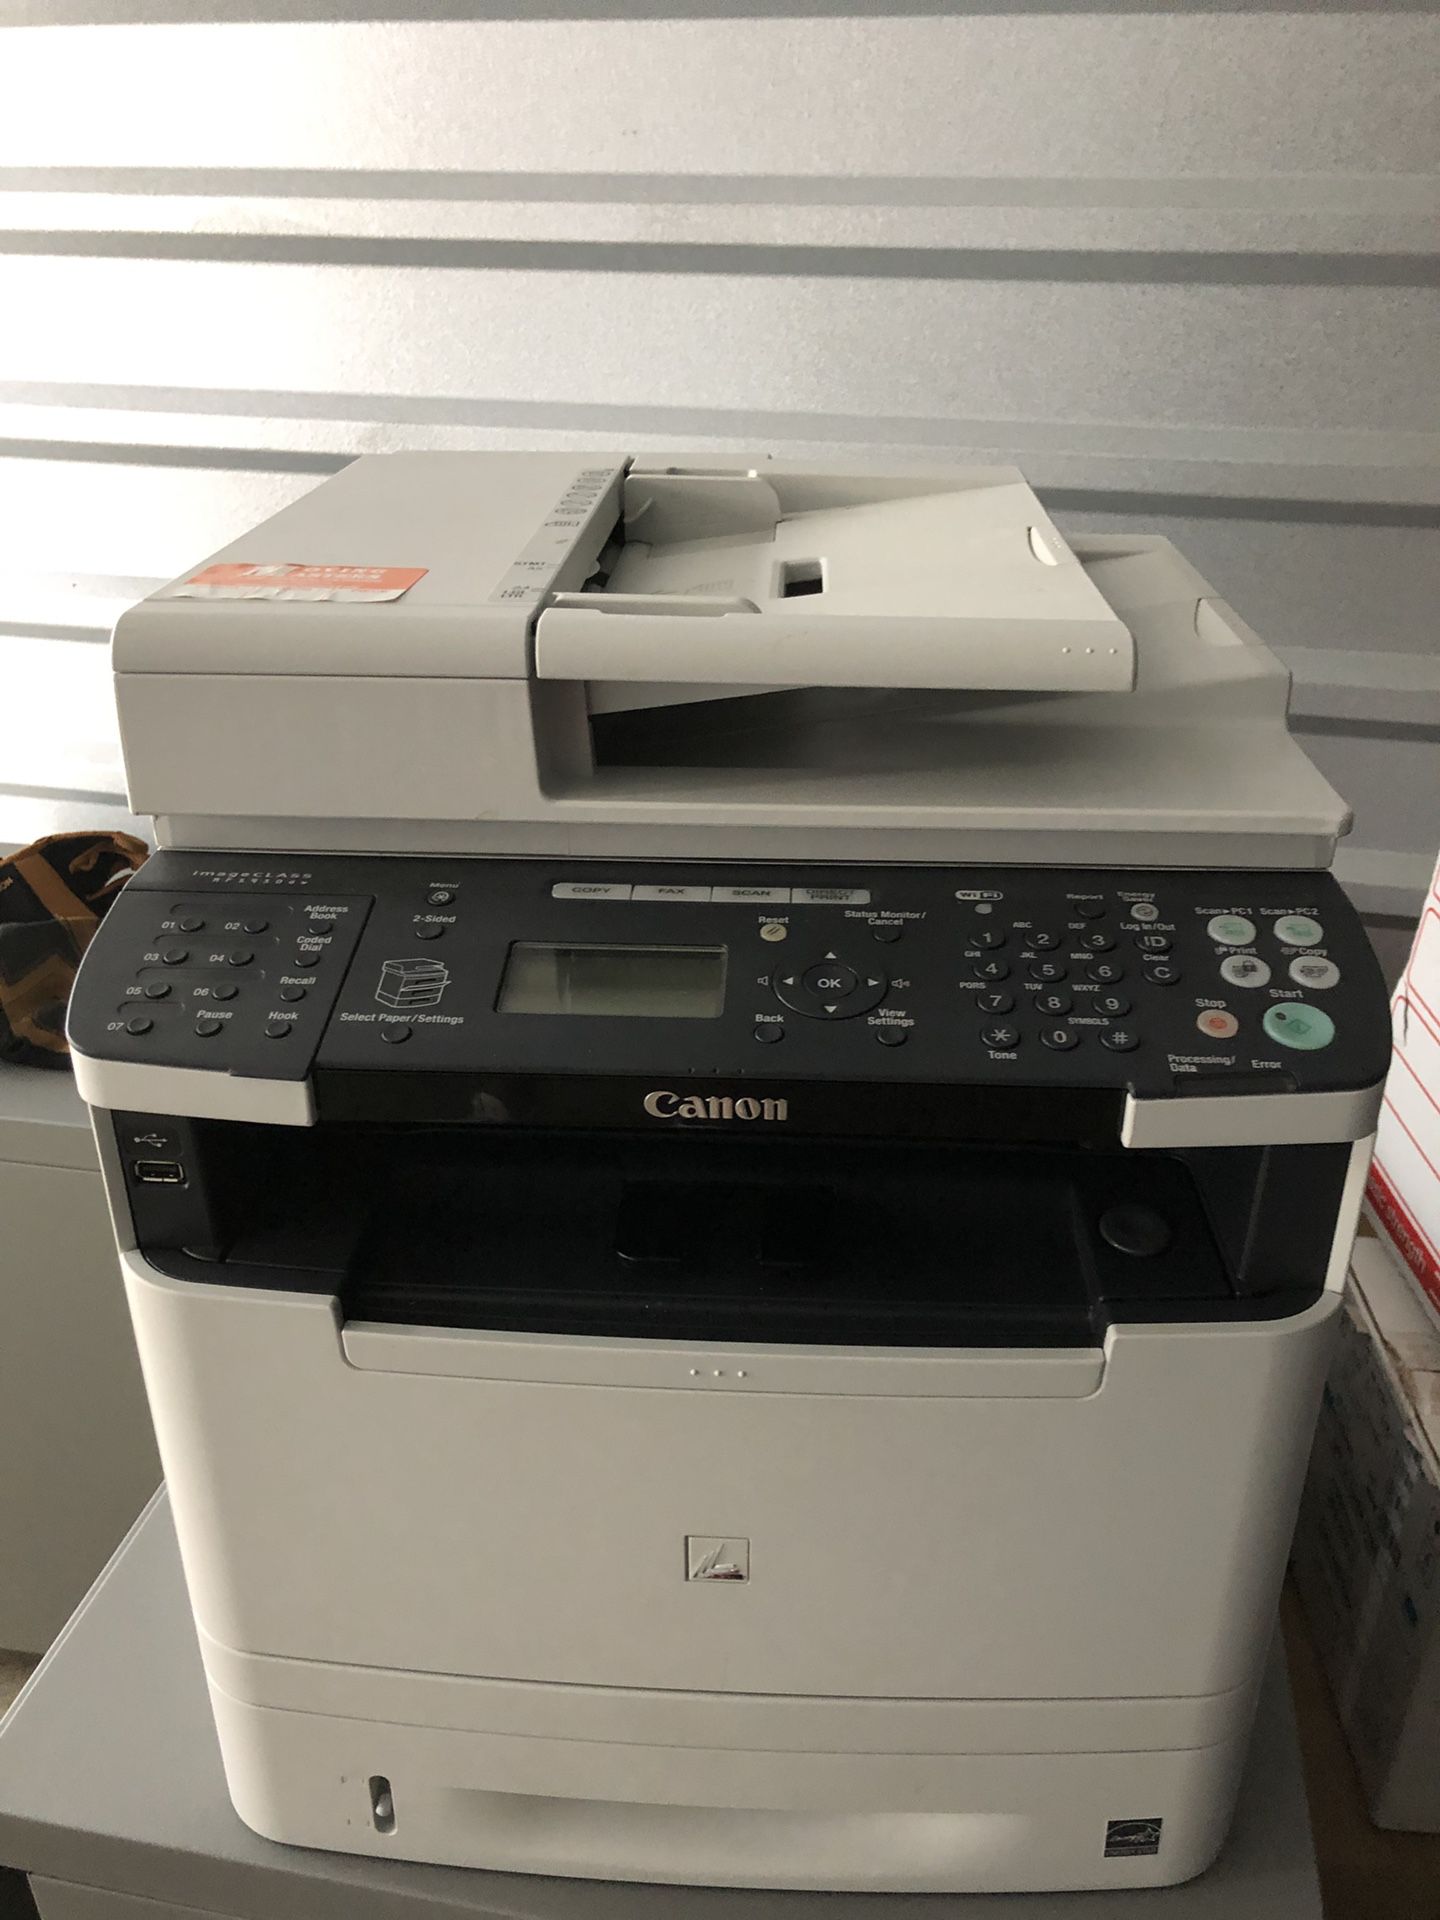 Fairly used Canon work size printer